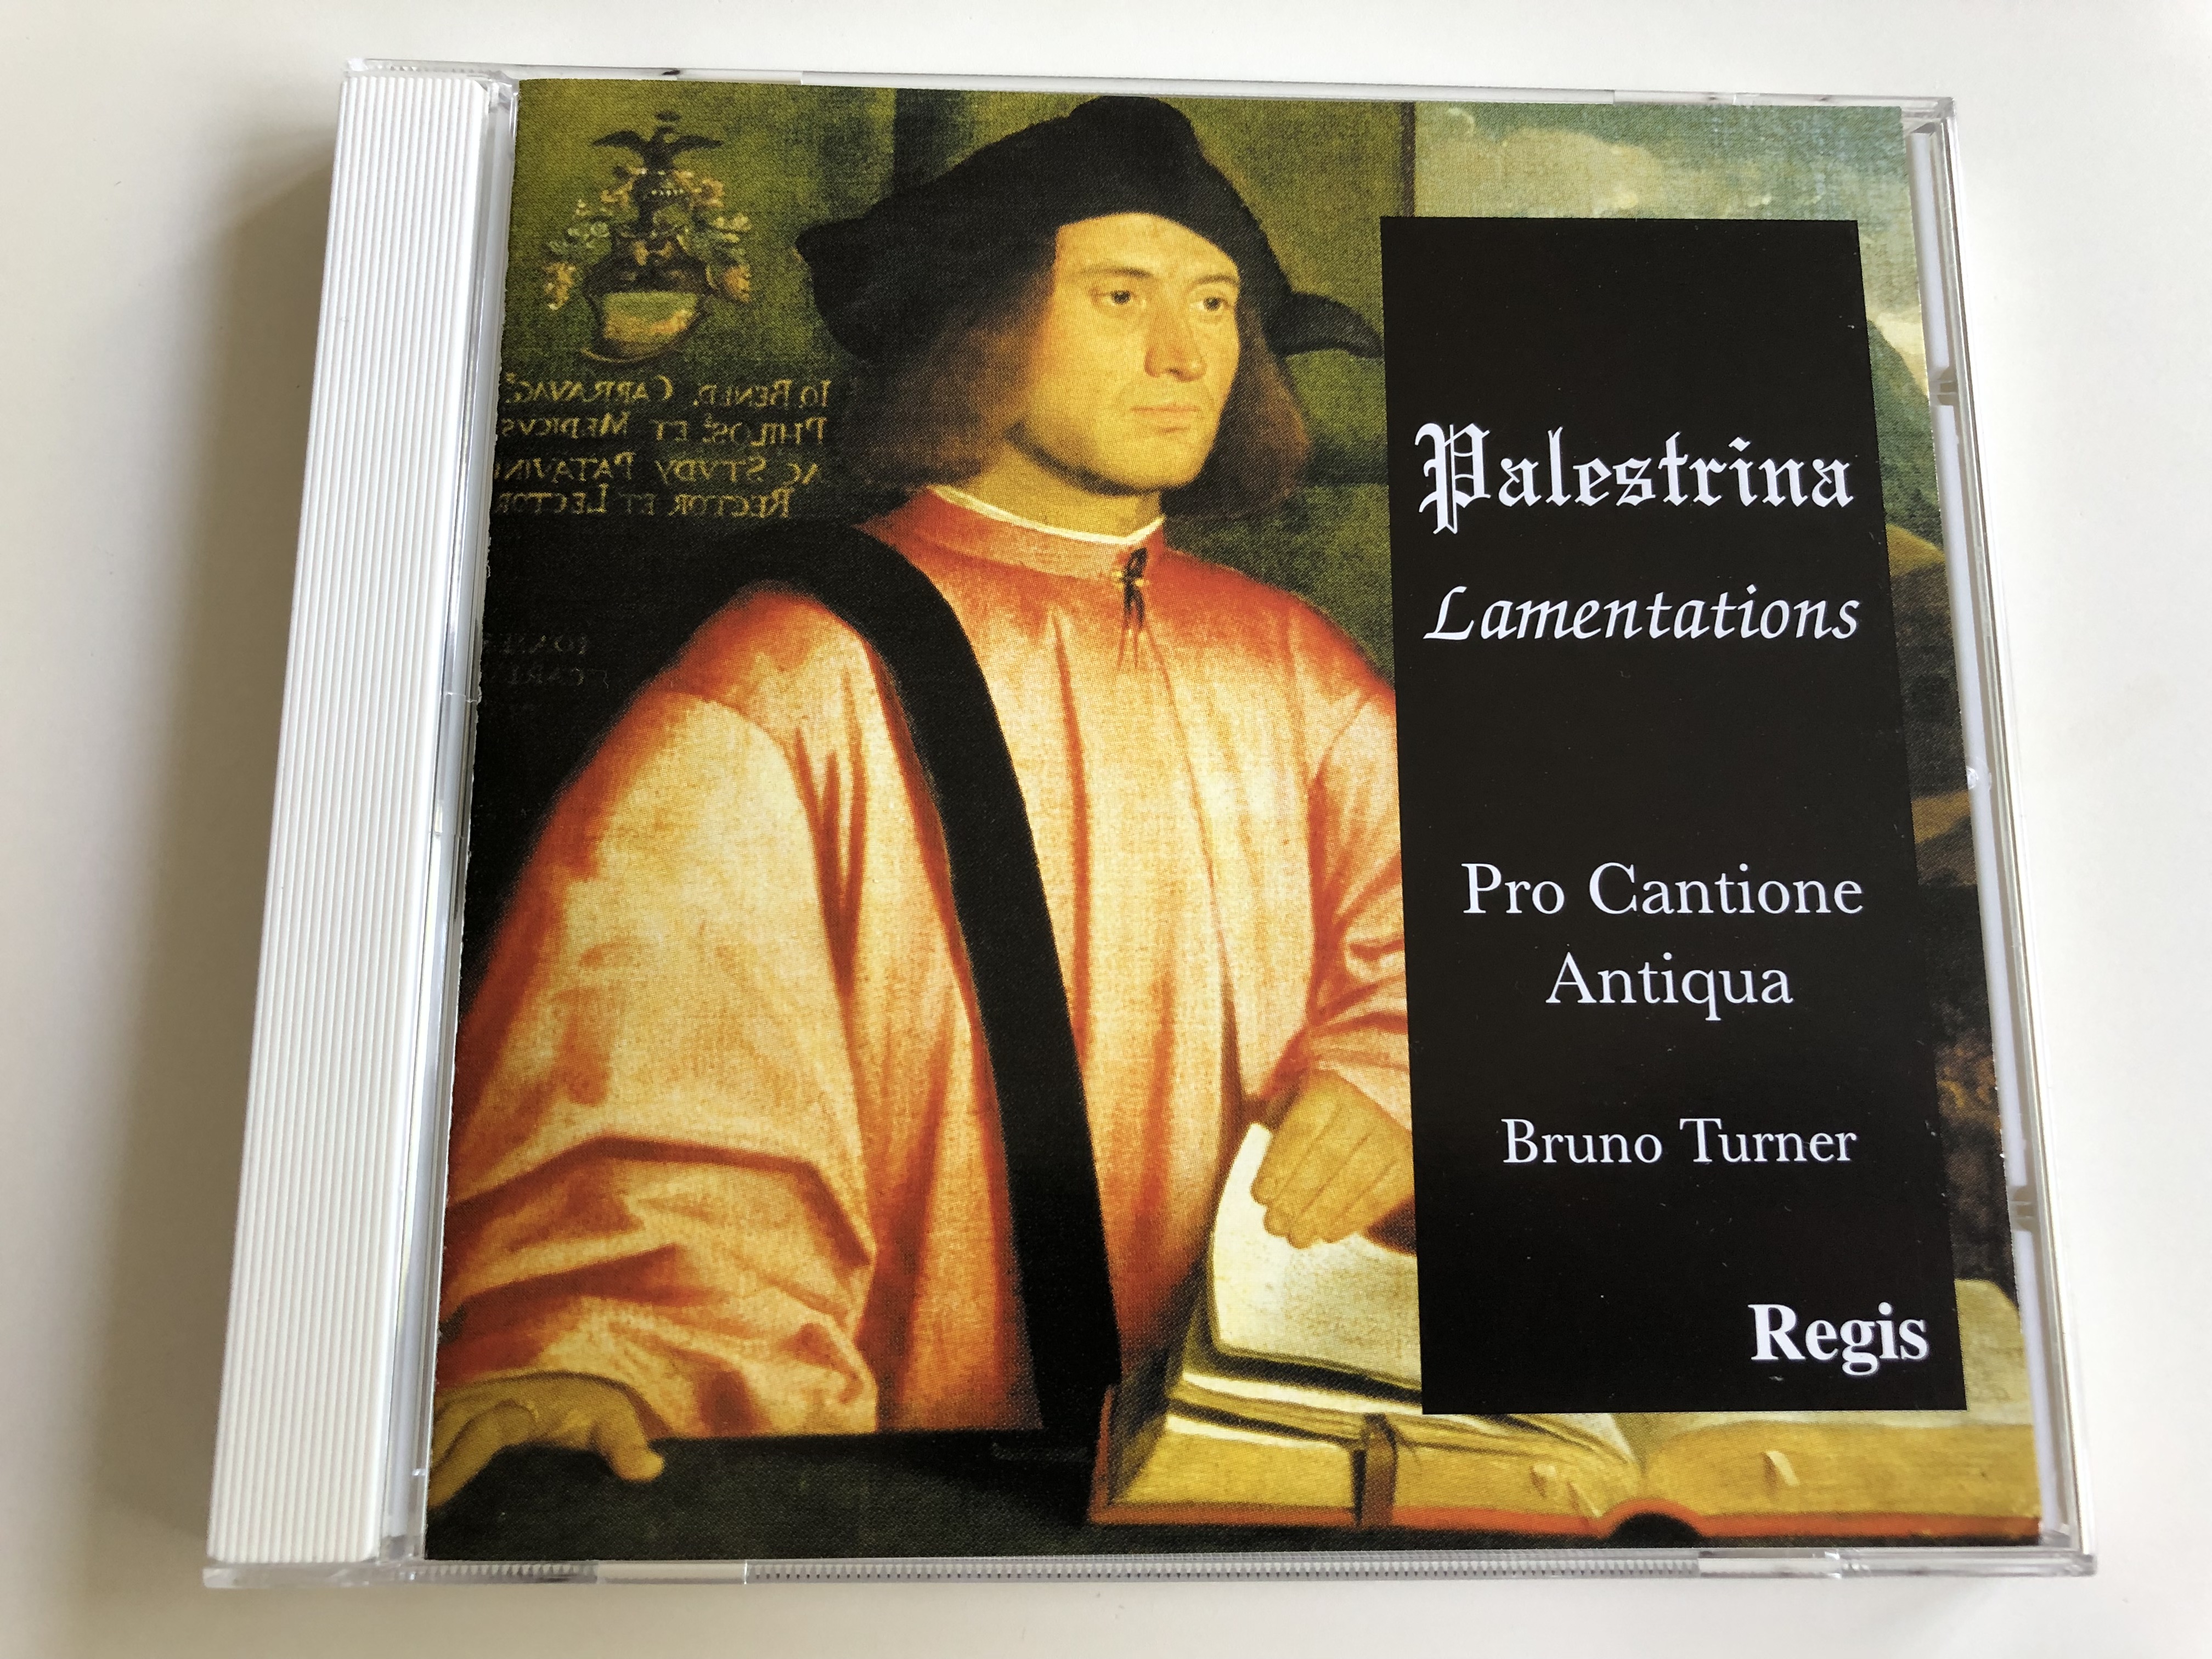 palestrina-lamentations-of-jeremiah-i-iii-book-iv-for-5-6-voices-pro-cantione-antiqua-bruno-turner-rrc-1038-audio-cd-1988-1-.jpg